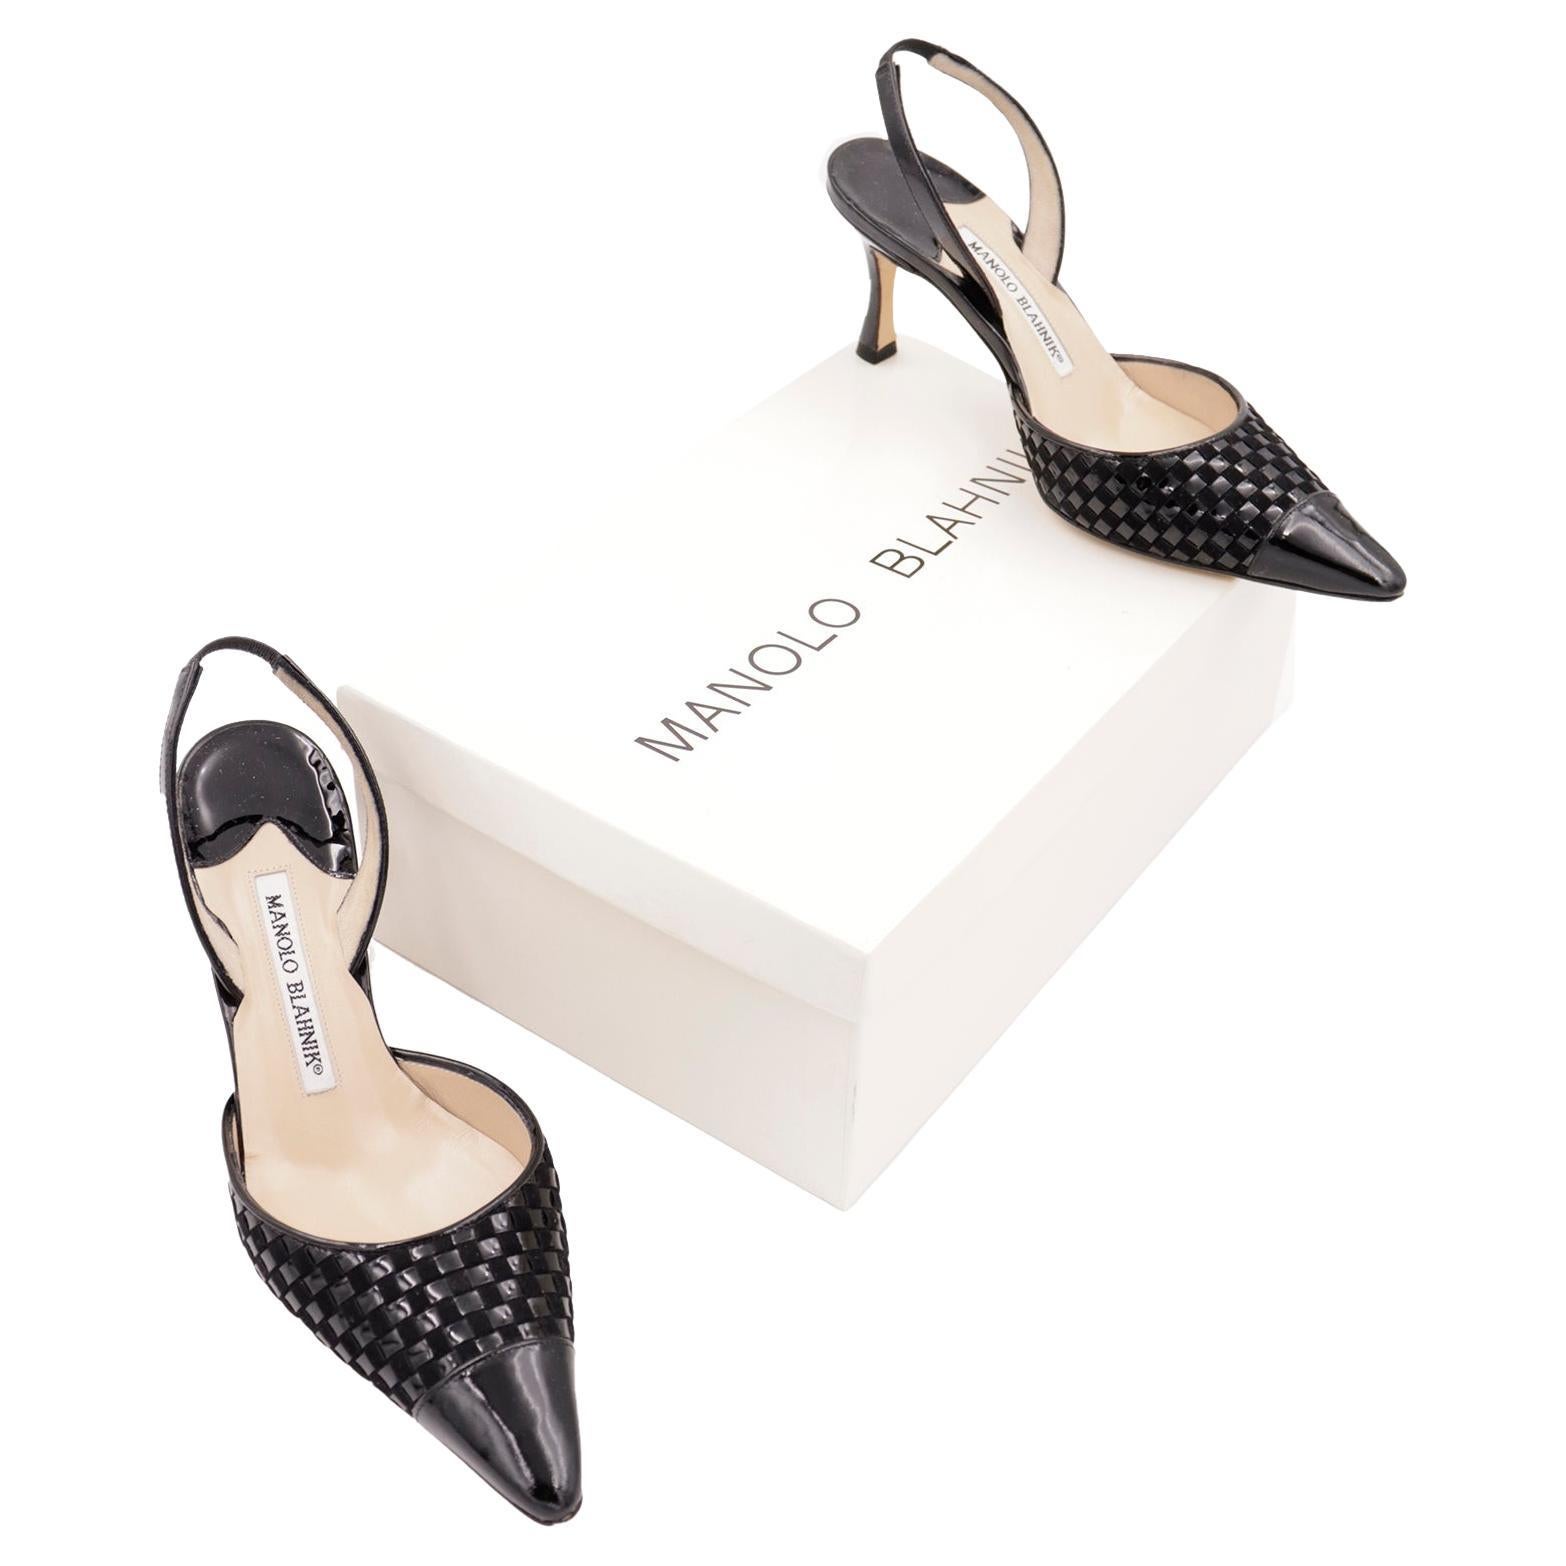 These are lovely Manolo Blahnik black leather basket weave Carolyne slingback shoes from the 2000's. These shoes come with their original box and were worn only once. We love the Blahnik Carolyne shoe and find it to be such a versatile style! These